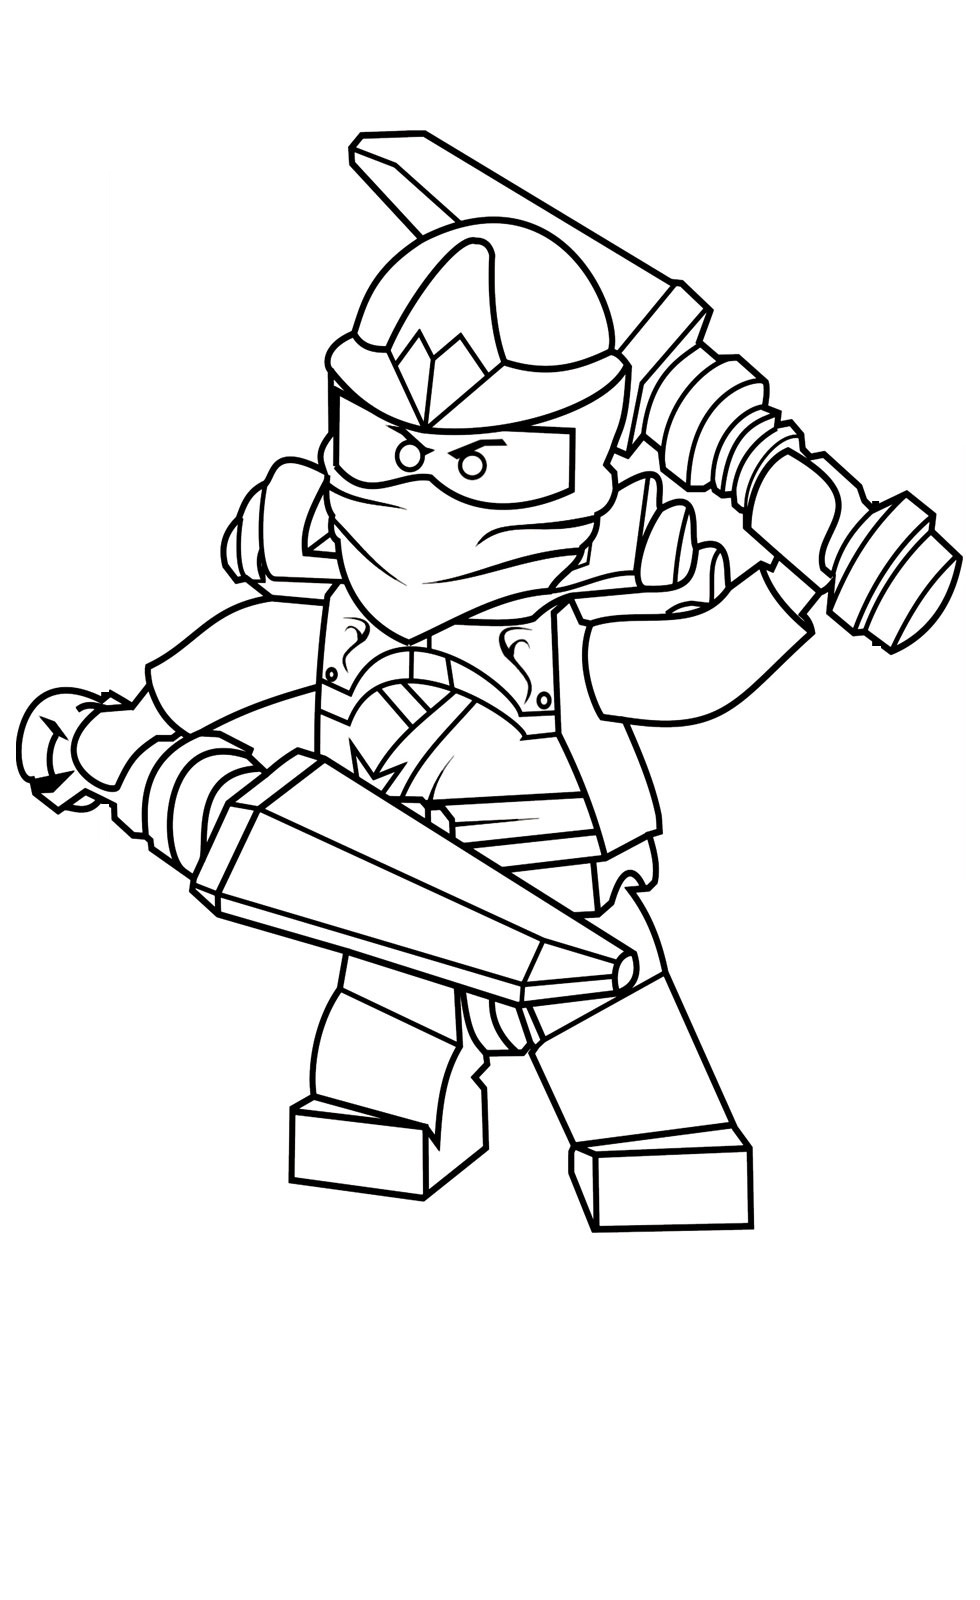 Lego Ninjago Coloring Pages - Best Coloring Pages For Kids